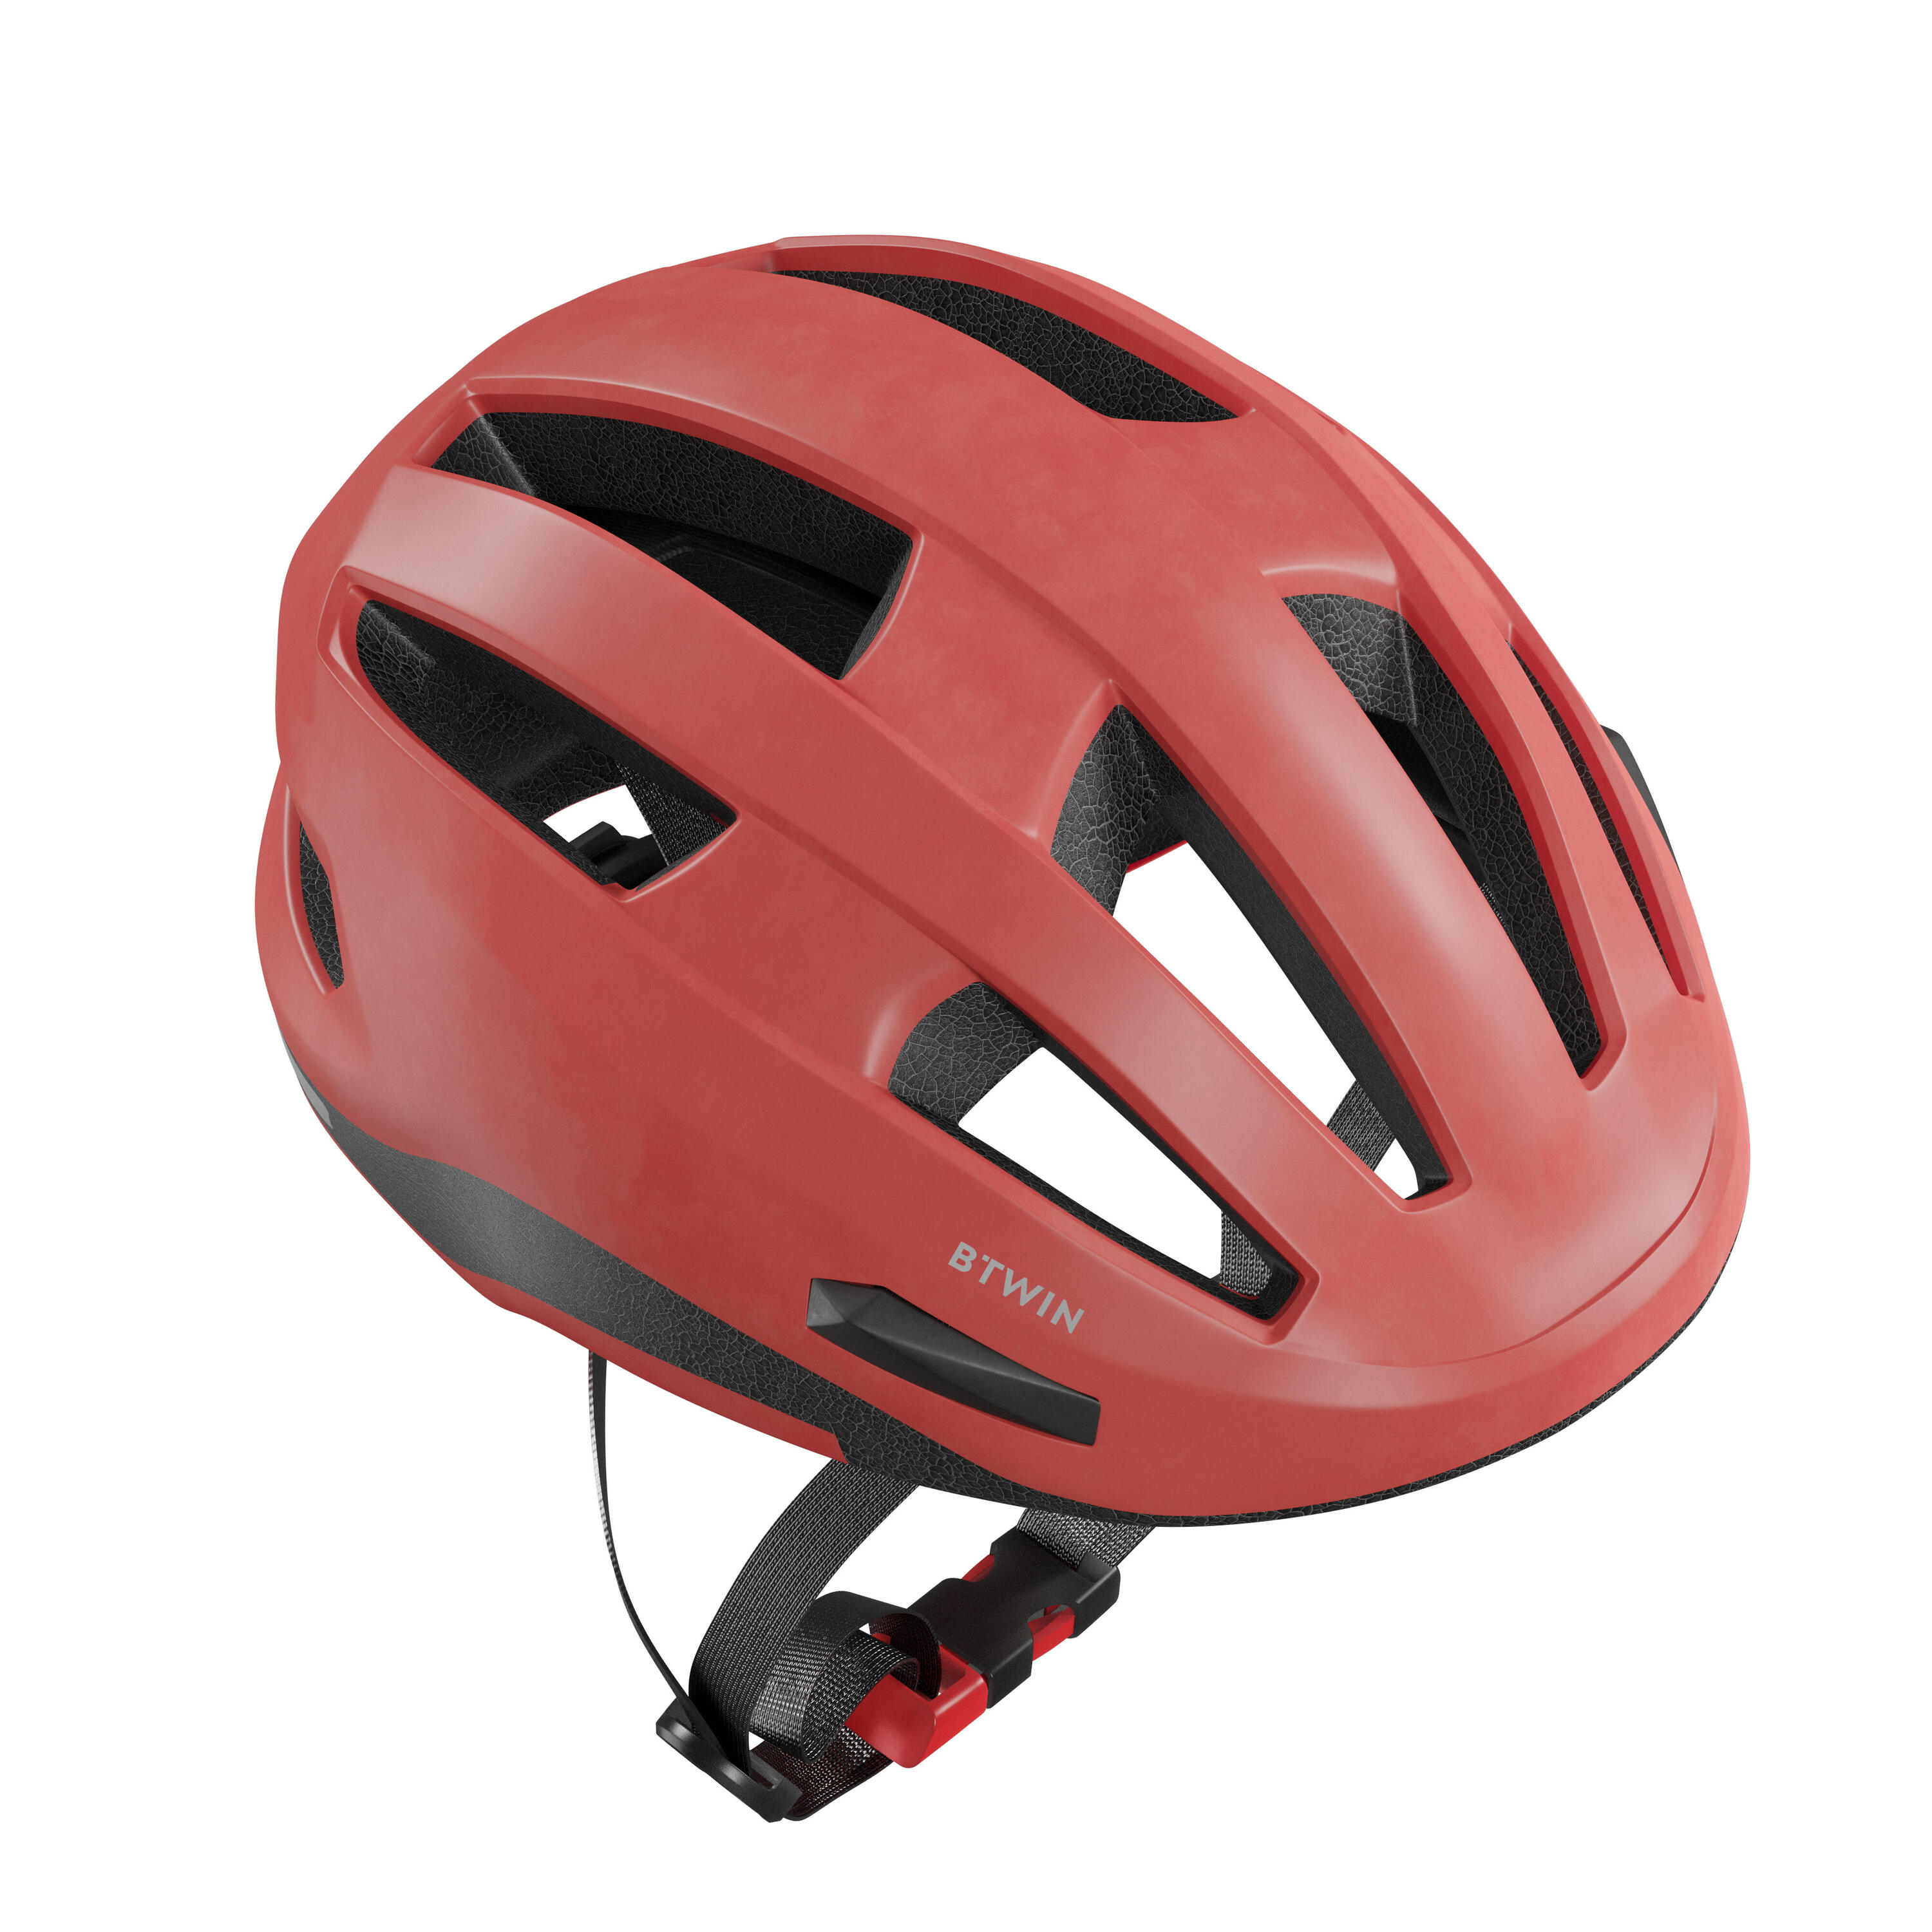 BTWIN 500 City Cycling Helmet - Red